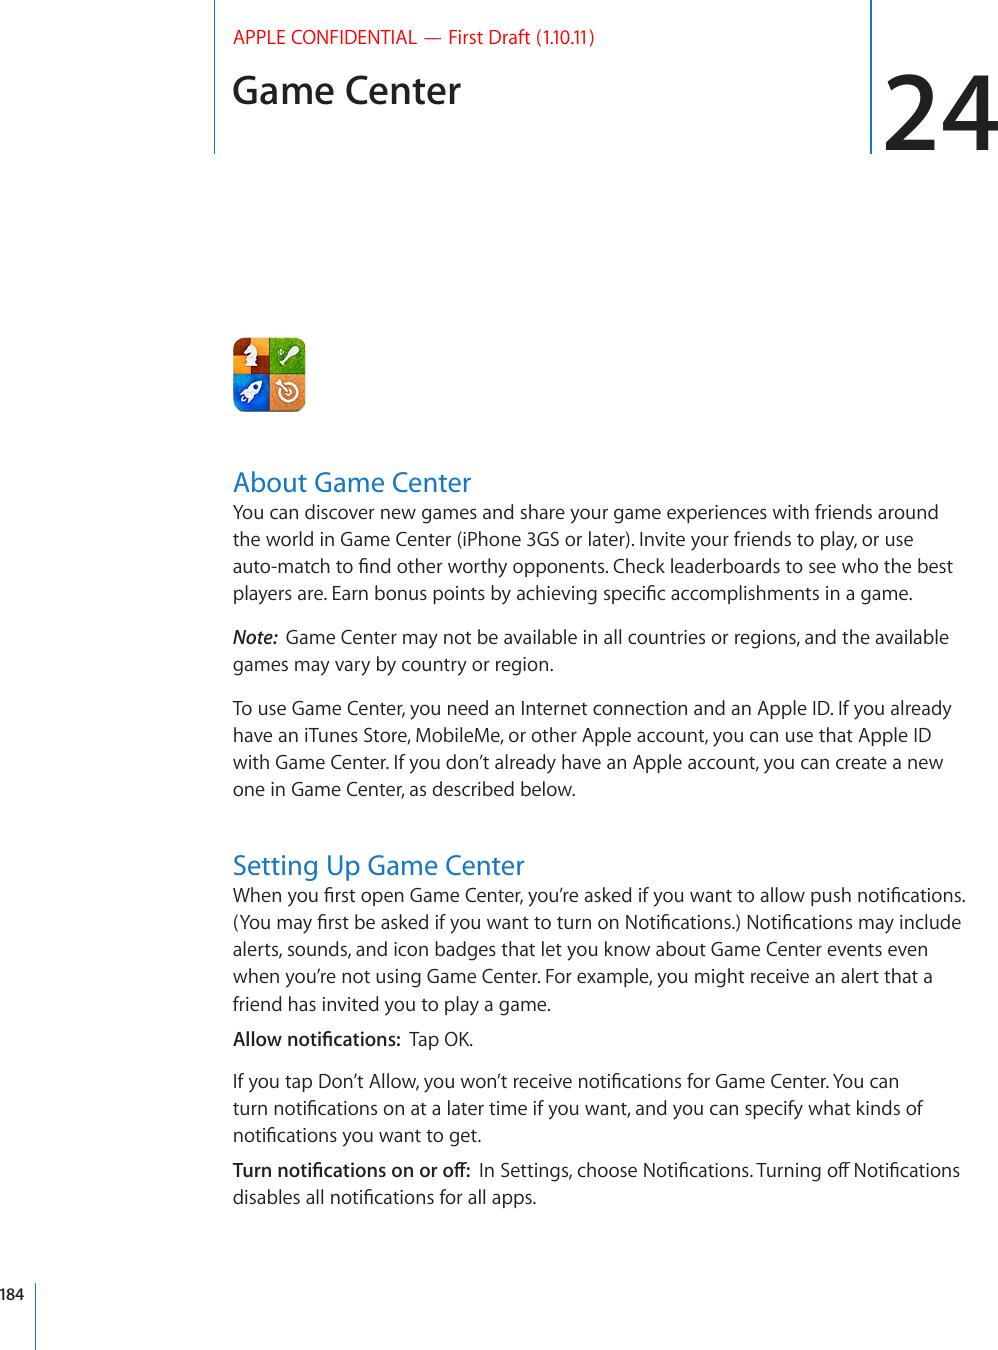 Game Center 24APPLE CONFIDENTIAL — First Draft (1.10.11)About Game CenterYou can discover new games and share your game experiences with friends around the world in Game Center (iPhone 3GS or later). Invite your friends to play, or use CWVQOCVEJVQ°PFQVJGTYQTVJ[QRRQPGPVU%JGEMNGCFGTDQCTFUVQUGGYJQVJGDGUVRNC[GTUCTG&apos;CTPDQPWURQKPVUD[CEJKGXKPIURGEK°ECEEQORNKUJOGPVUKPCICOGNote:  Game Center may not be available in all countries or regions, and the available games may vary by country or region.To use Game Center, you need an Internet connection and an Apple ID. If you already have an iTunes Store, MobileMe, or other Apple account, you can use that Apple ID with Game Center. If you don’t already have an Apple account, you can create a new one in Game Center, as described below.Setting Up Game Center9JGP[QW°TUVQRGP)COG%GPVGT[QW¨TGCUMGFKH[QWYCPVVQCNNQYRWUJPQVK°ECVKQPU;QWOC[°TUVDGCUMGFKH[QWYCPVVQVWTPQP0QVK°ECVKQPU0QVK°ECVKQPUOC[KPENWFGalerts, sounds, and icon badges that let you know about Game Center events even when you’re not using Game Center. For example, you might receive an alert that a friend has invited you to play a game. #NNQYPQVK°ECVKQPU6CR1-+H[QWVCR&amp;QP¨V#NNQY[QWYQP¨VTGEGKXGPQVK°ECVKQPUHQT)COG%GPVGT;QWECPVWTPPQVK°ECVKQPUQPCVCNCVGTVKOGKH[QWYCPVCPF[QWECPURGEKH[YJCVMKPFUQHPQVK°ECVKQPU[QWYCPVVQIGV6WTPPQVK°ECVKQPUQPQTQÒ+P5GVVKPIUEJQQUG0QVK°ECVKQPU6WTPKPIQÒ0QVK°ECVKQPUFKUCDNGUCNNPQVK°ECVKQPUHQTCNNCRRU184